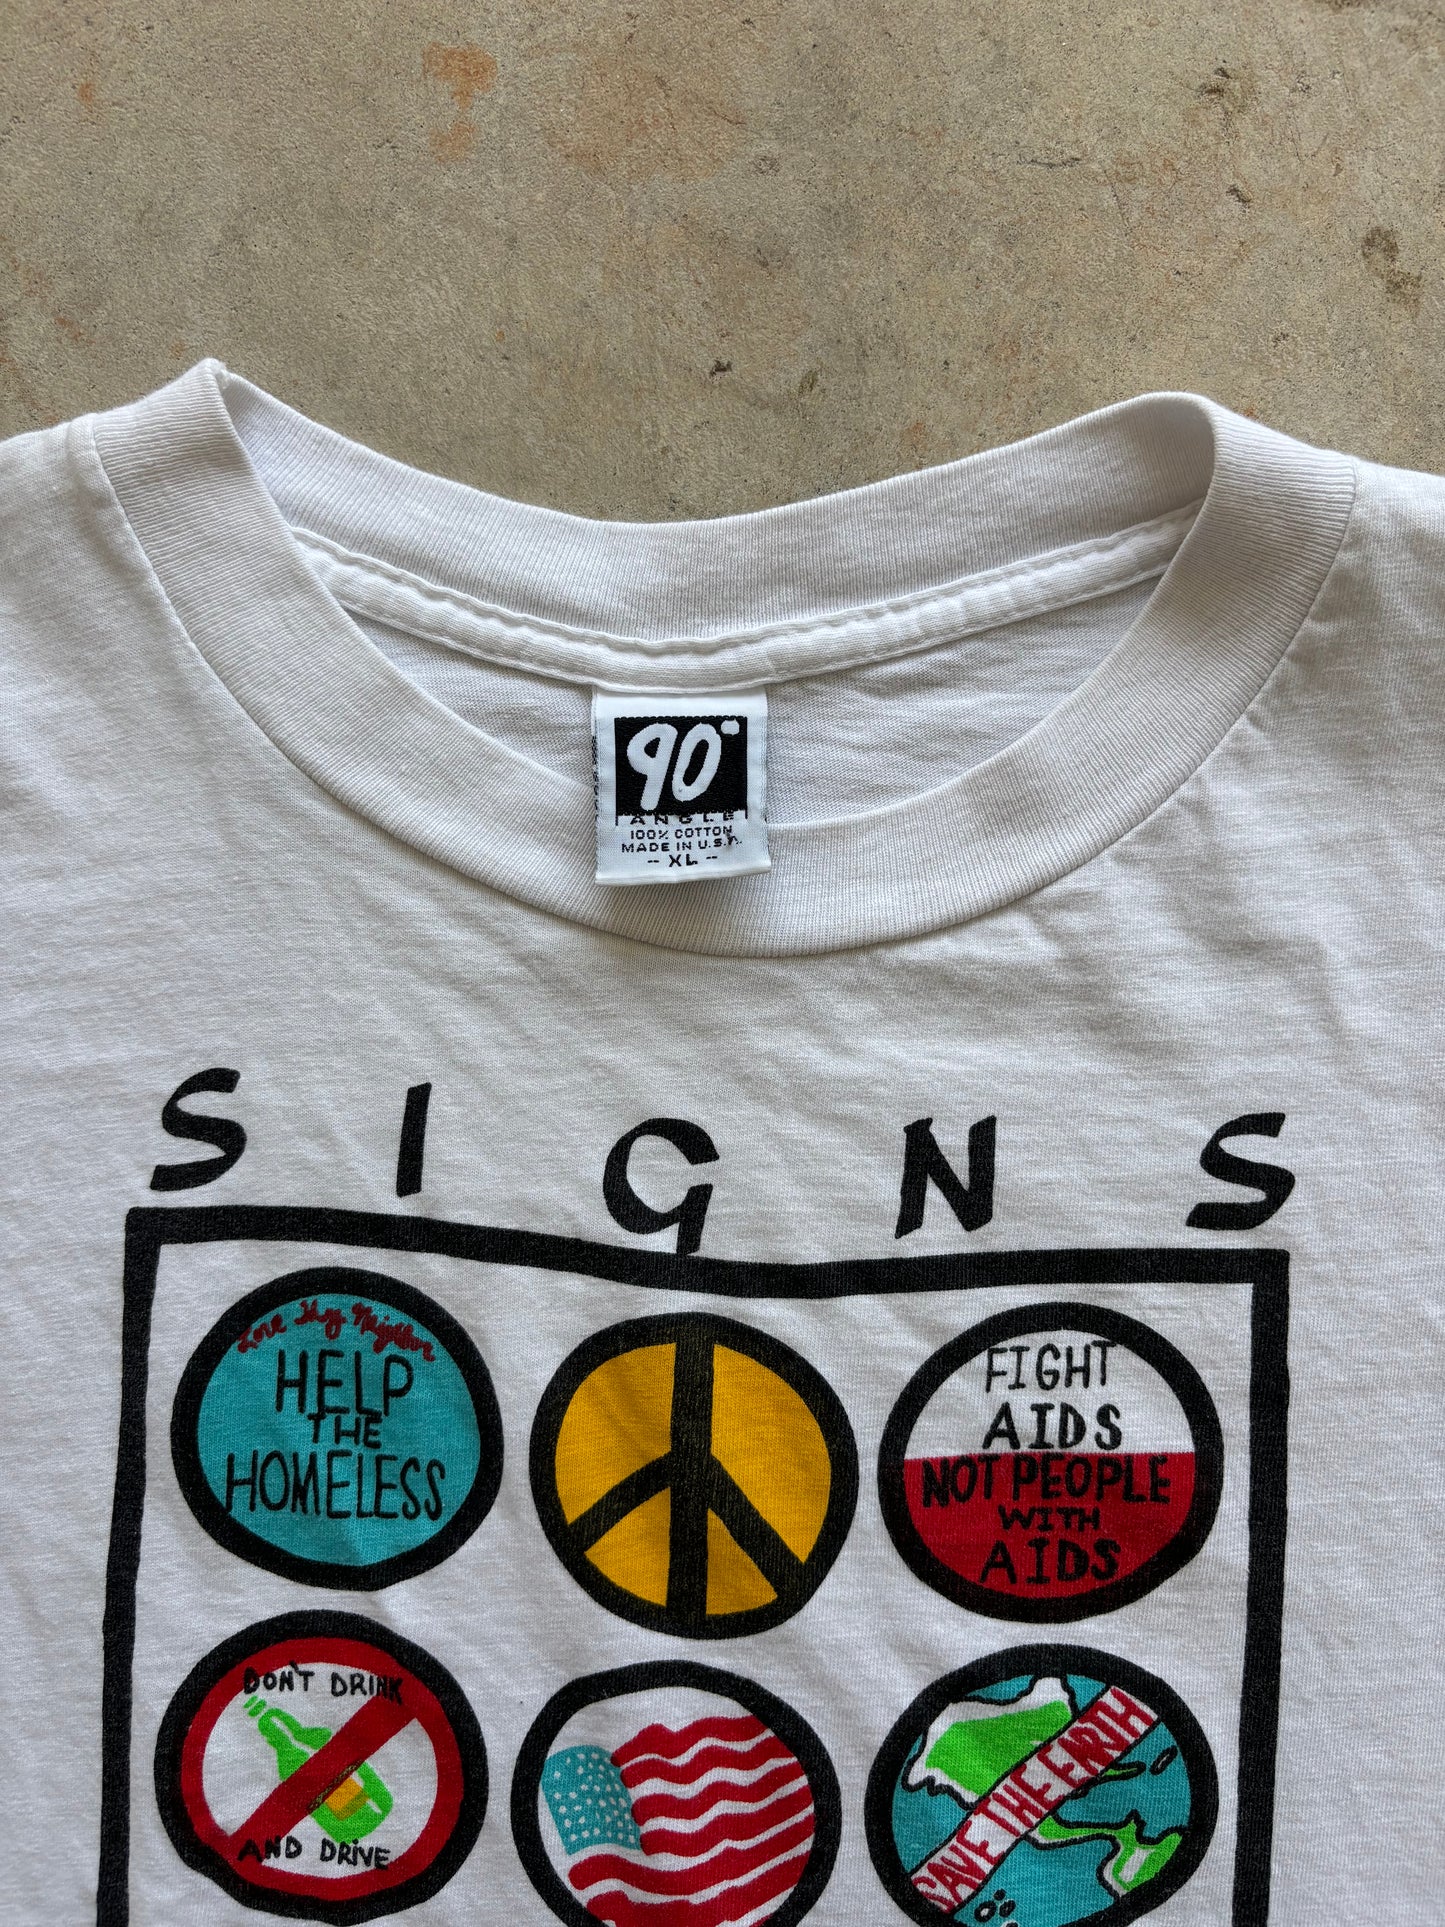 1990’s Signs of The Times Tee Size XL